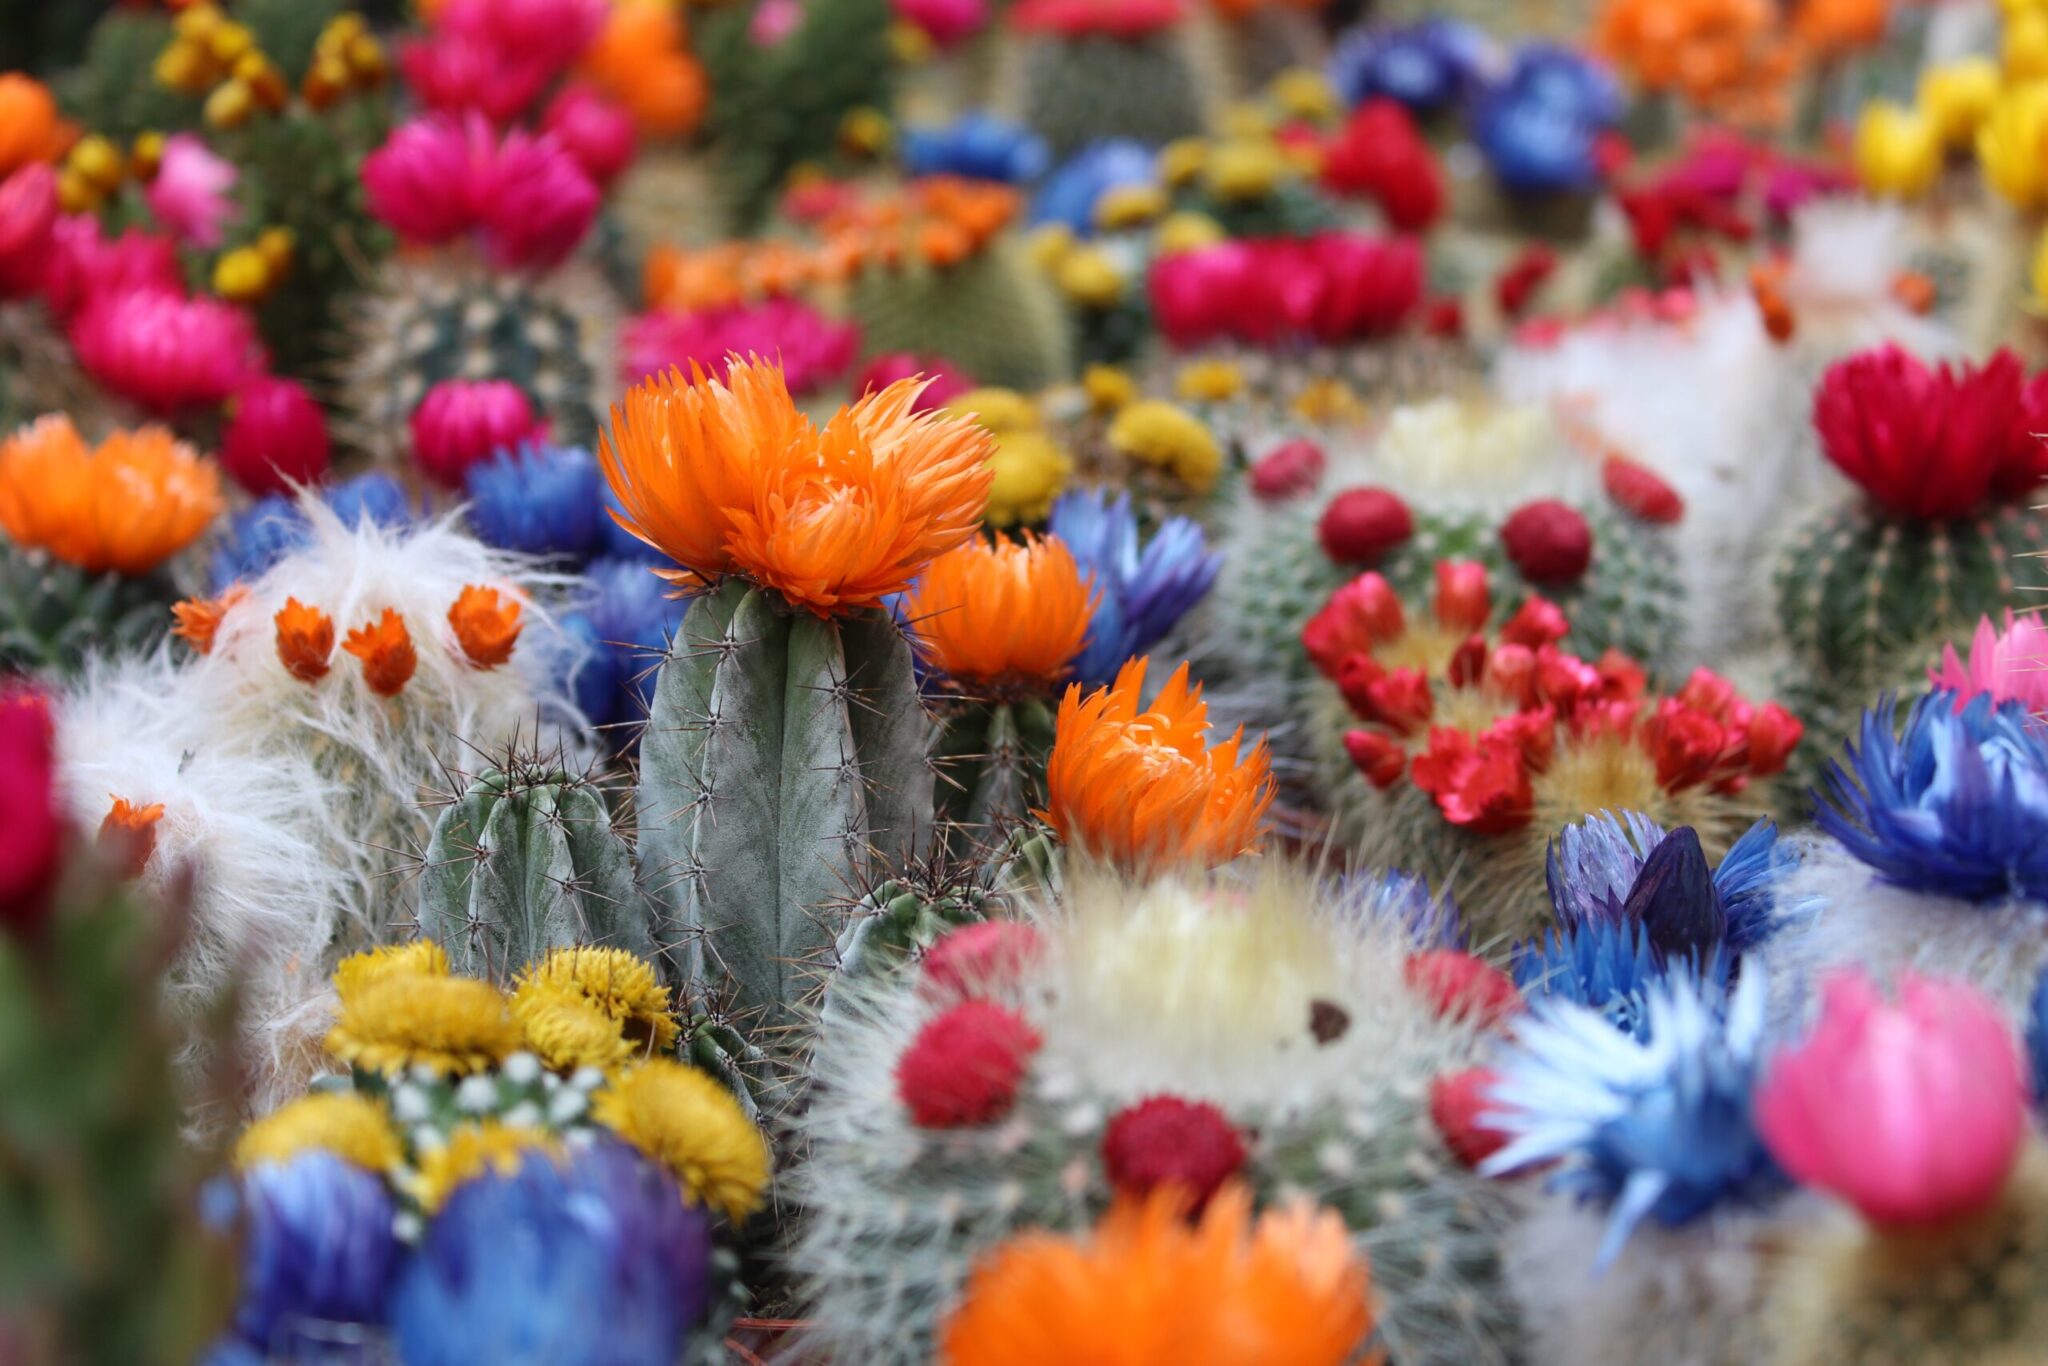 beautiful field of colorful cactus with multi-colored flowers and thorns demonstrating opposites